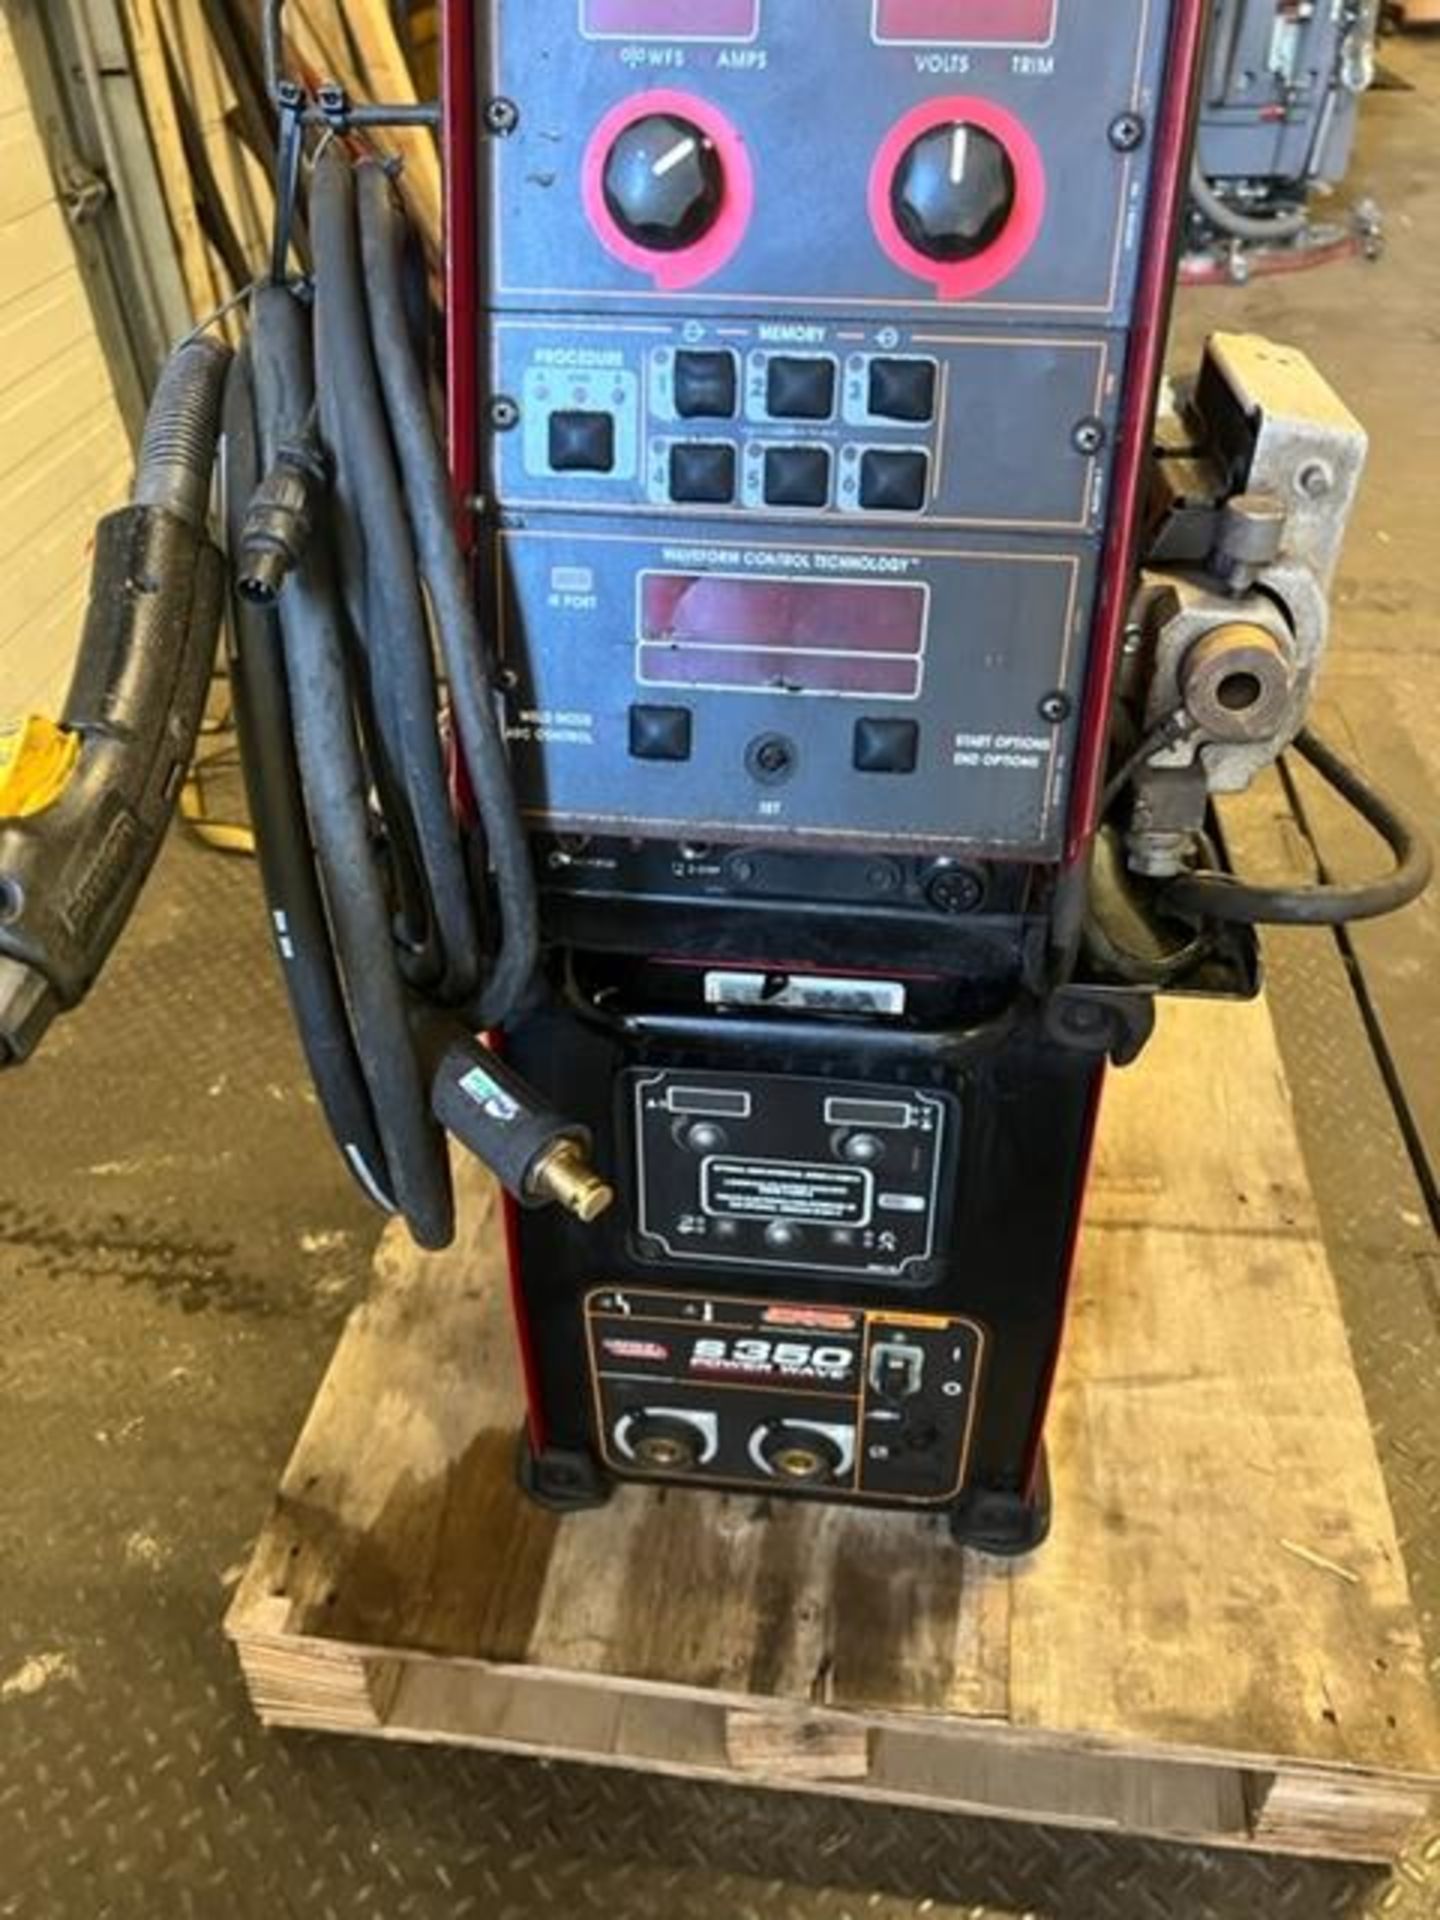 Lincoln S350 Powerwave Welder with Powerfeed 10M Wire Feeder Welding Unit 220/380/460/575V - Image 2 of 3